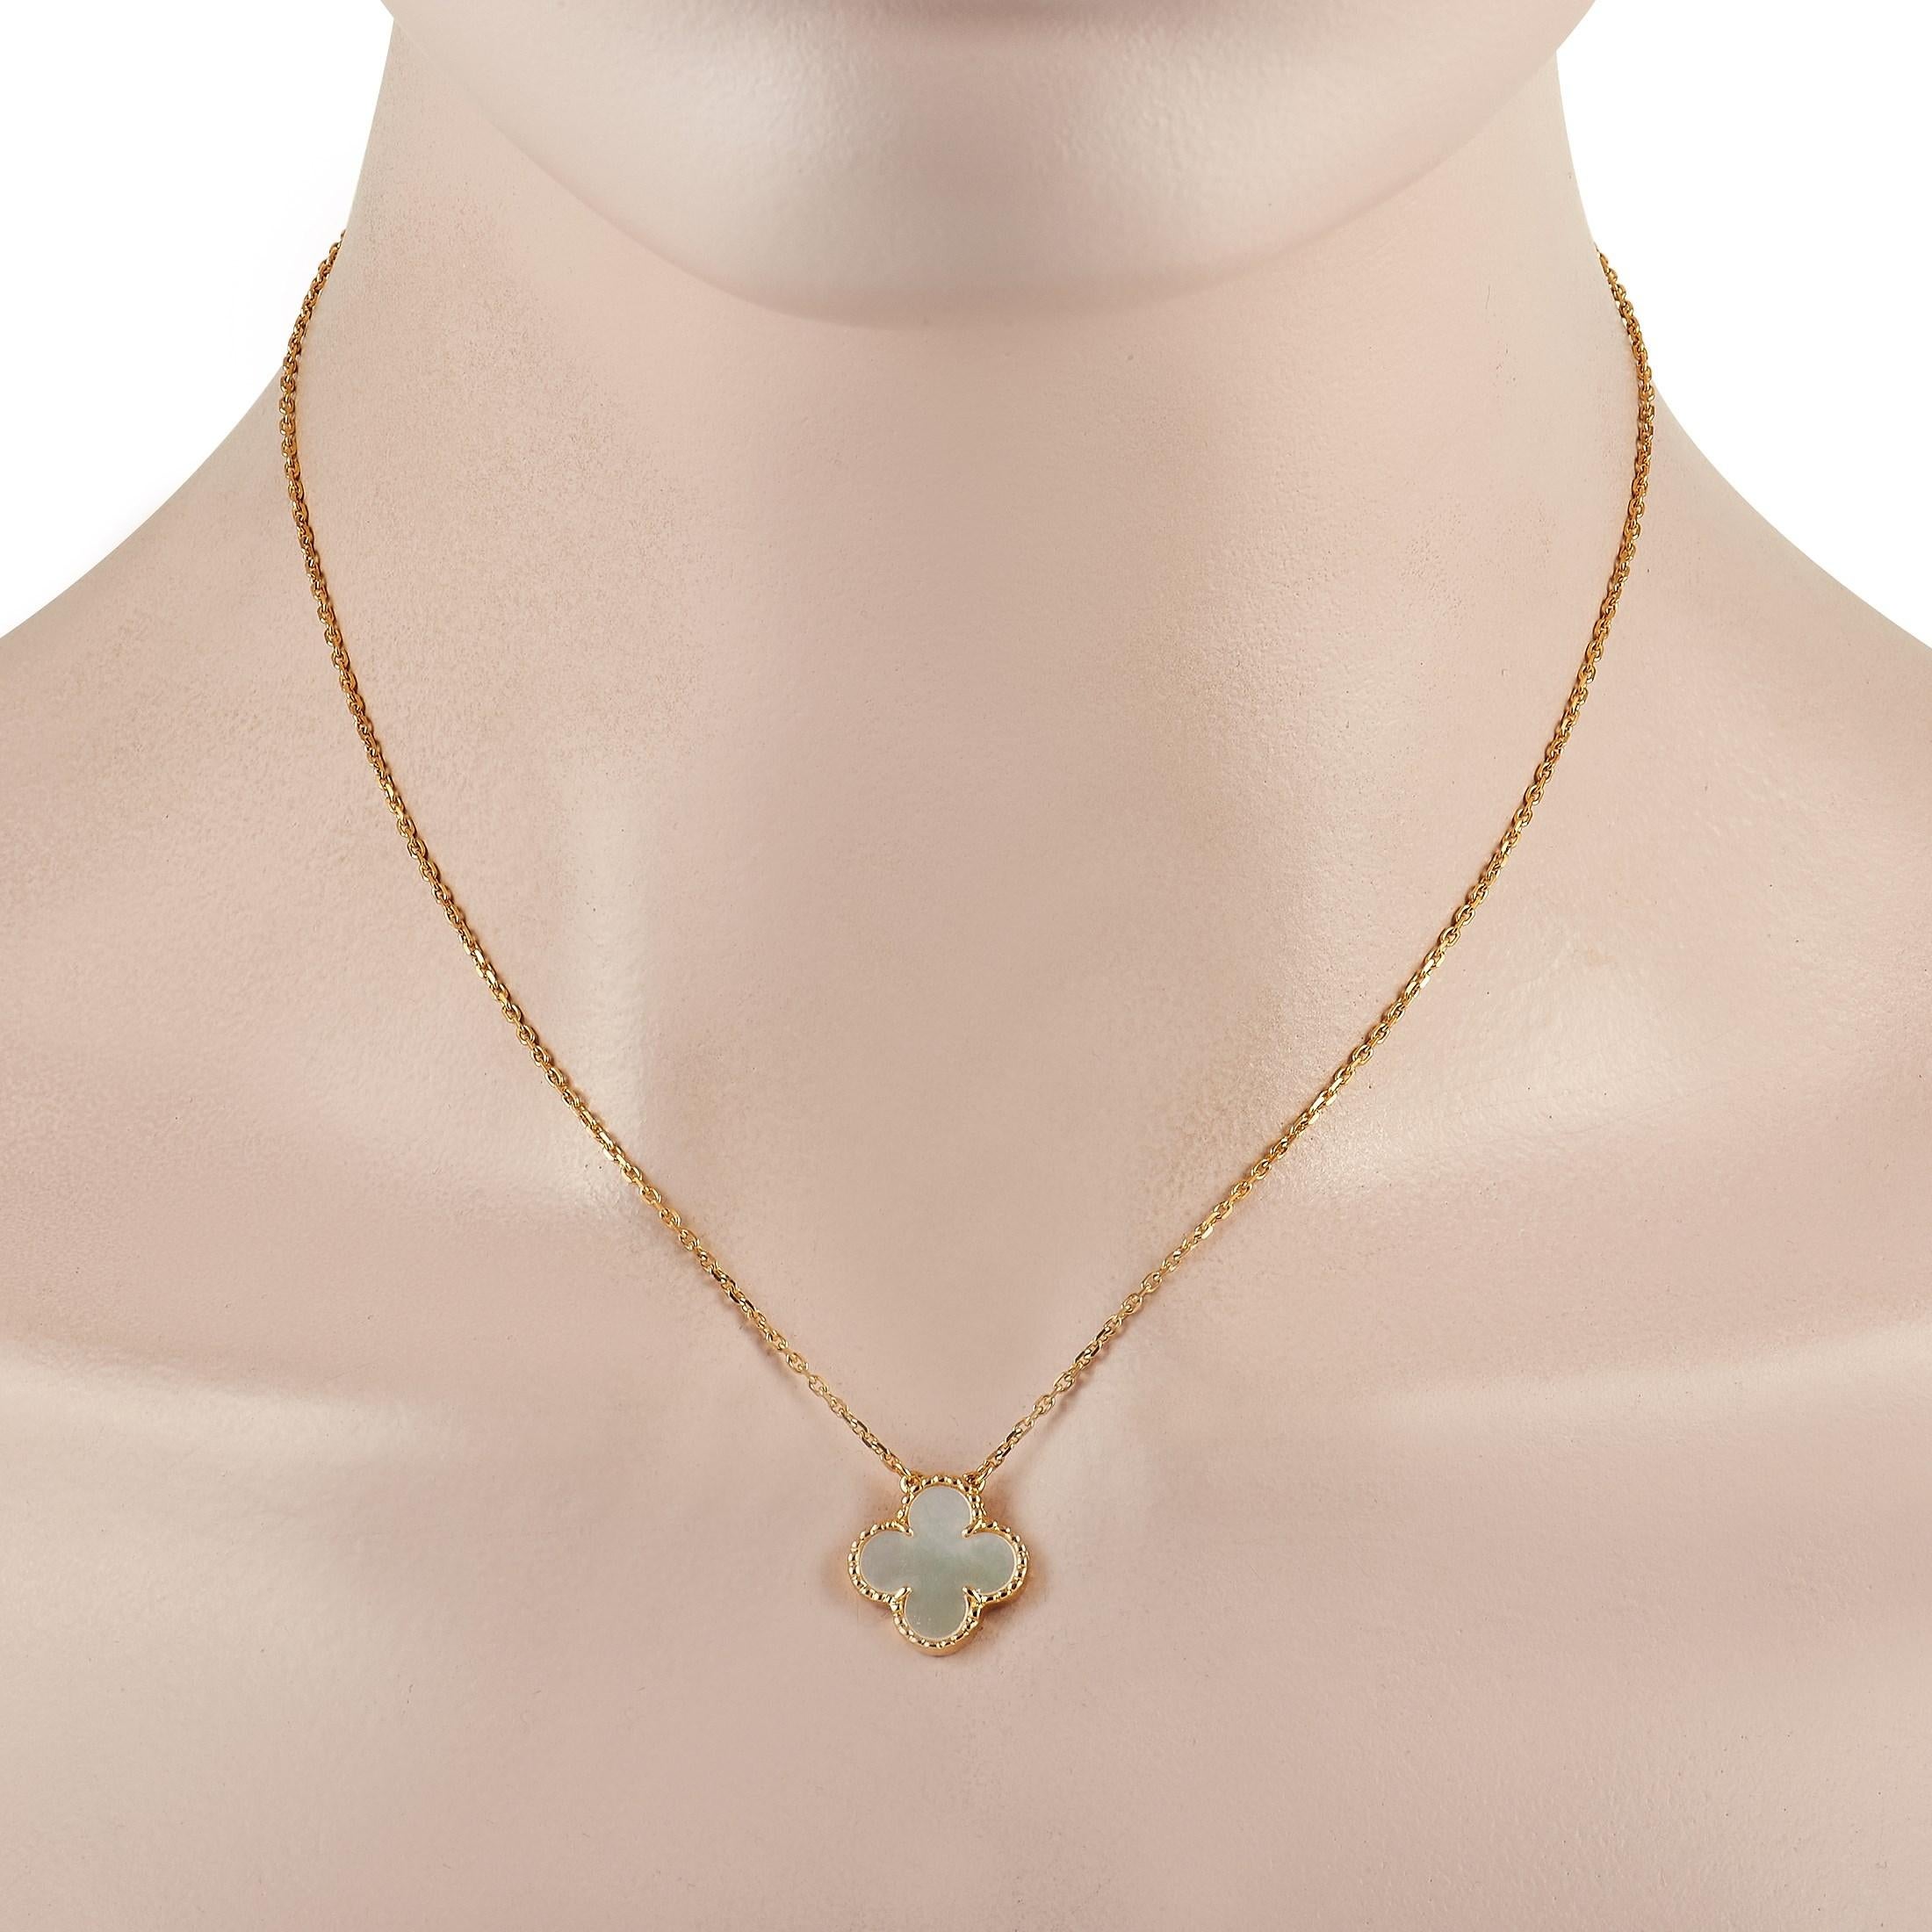 Versatile and refined, thsi Van Cleef & Arpels 18K Yellow Gold Mother of Pearl Necklace is an understated treasure worthy of putting on display every day. The yellow gold necklace holds an Alhambra pendant with the recognizable four-leaf clover